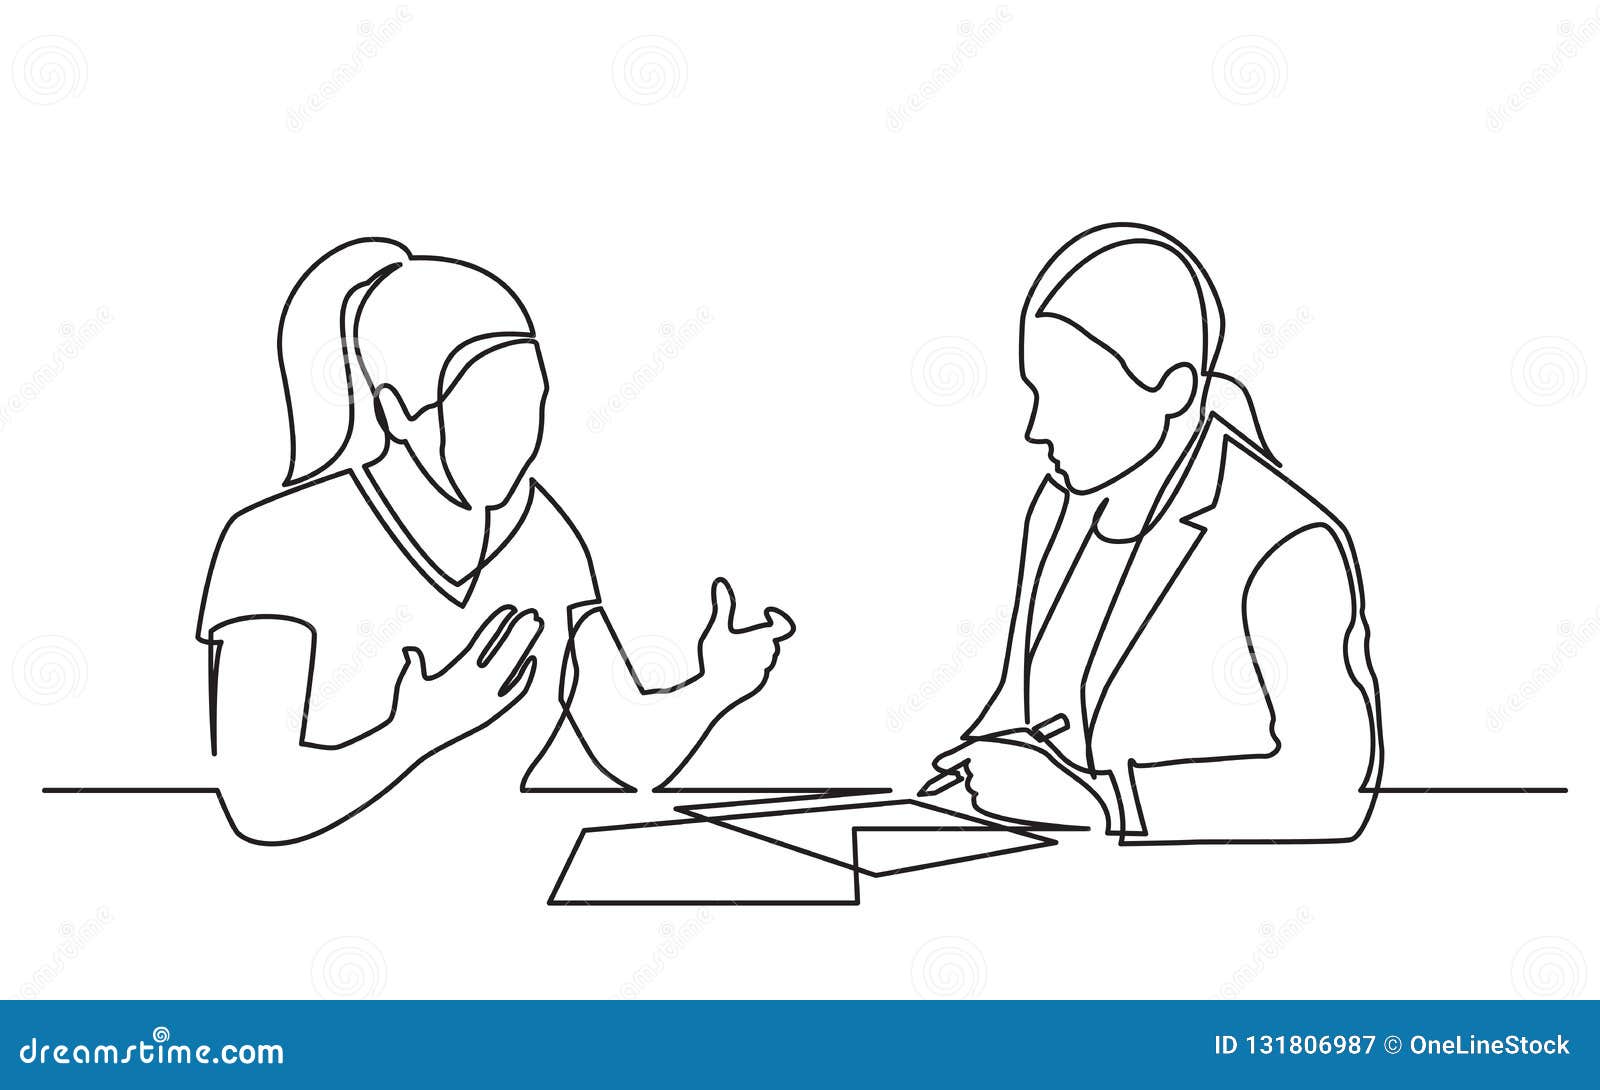 continuous line drawing of two women discussing signing paperworks